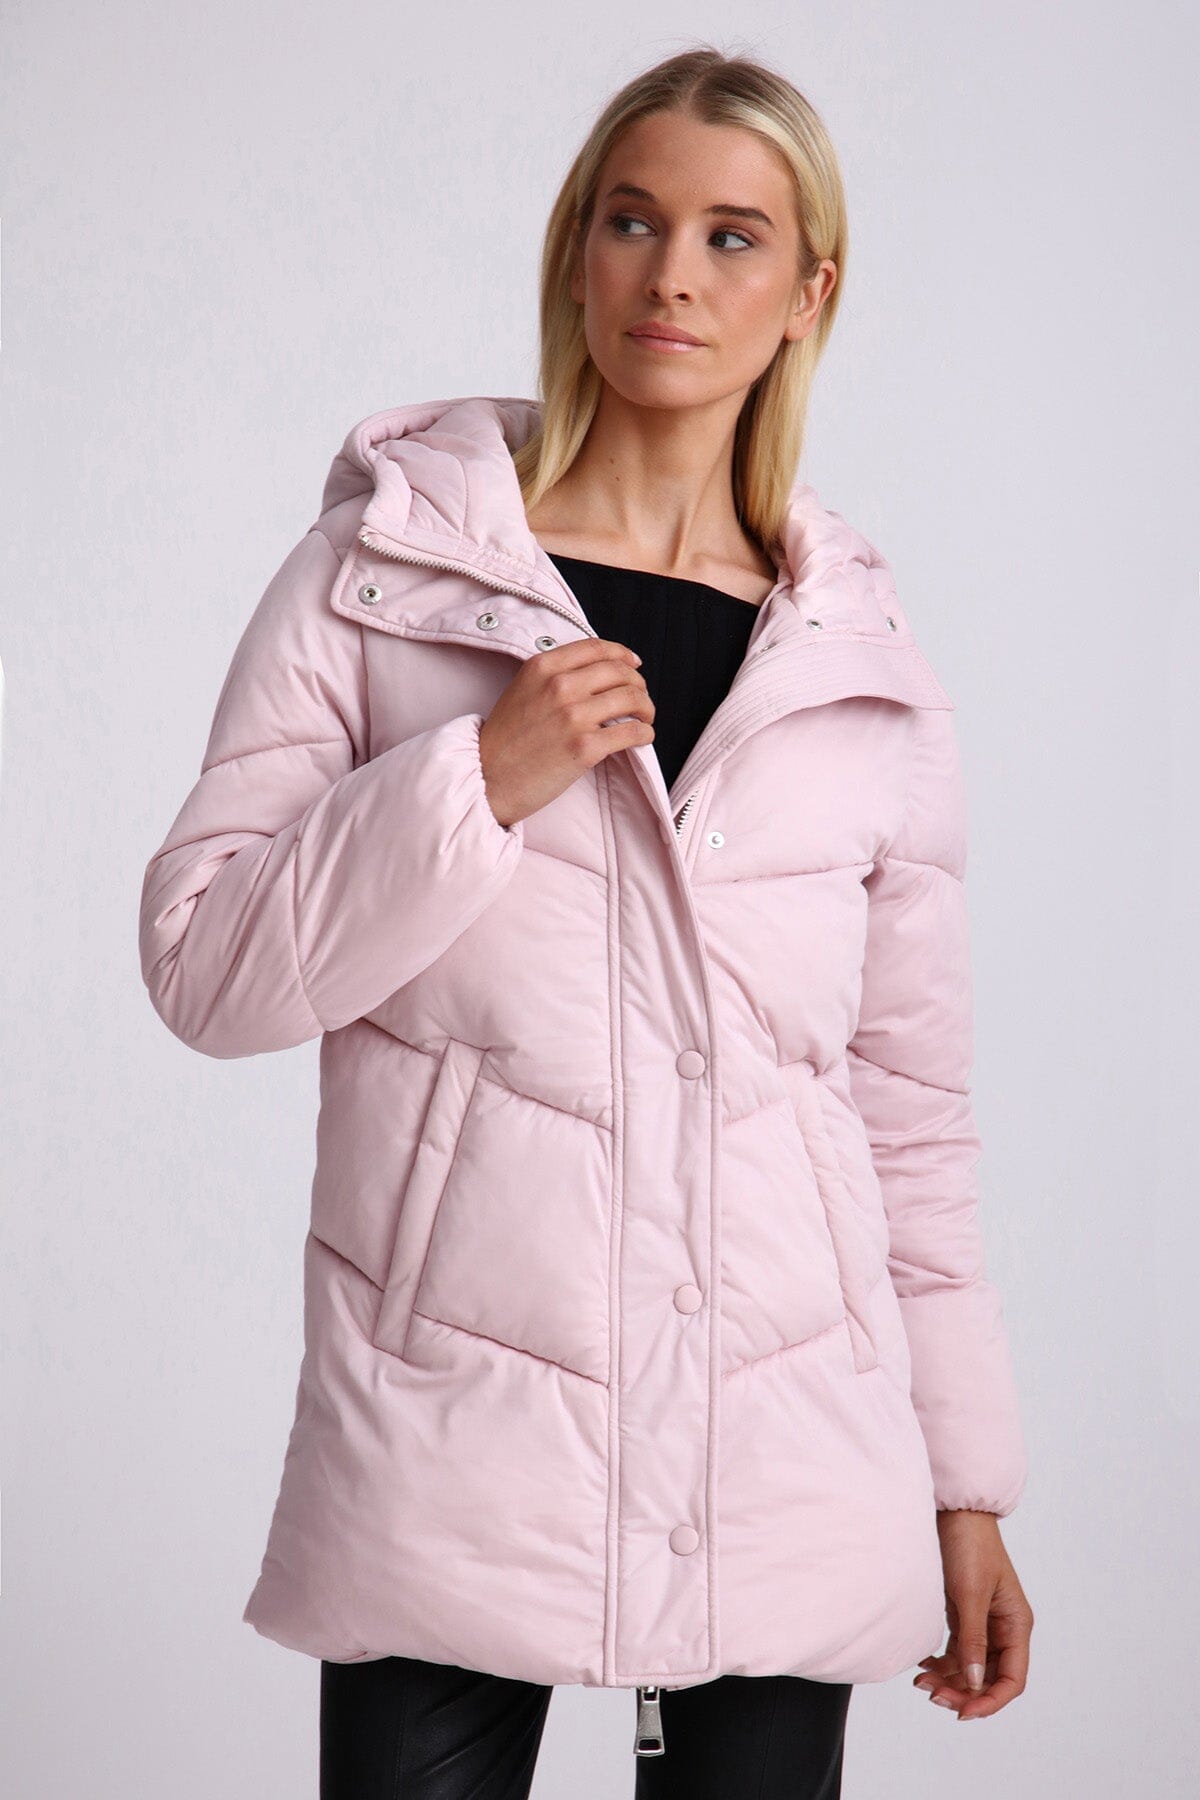 Light pink thermal puff cloud duvet hooded puffer coat jacket - figure flattering Fall 2023 outerwear fashion for ladies